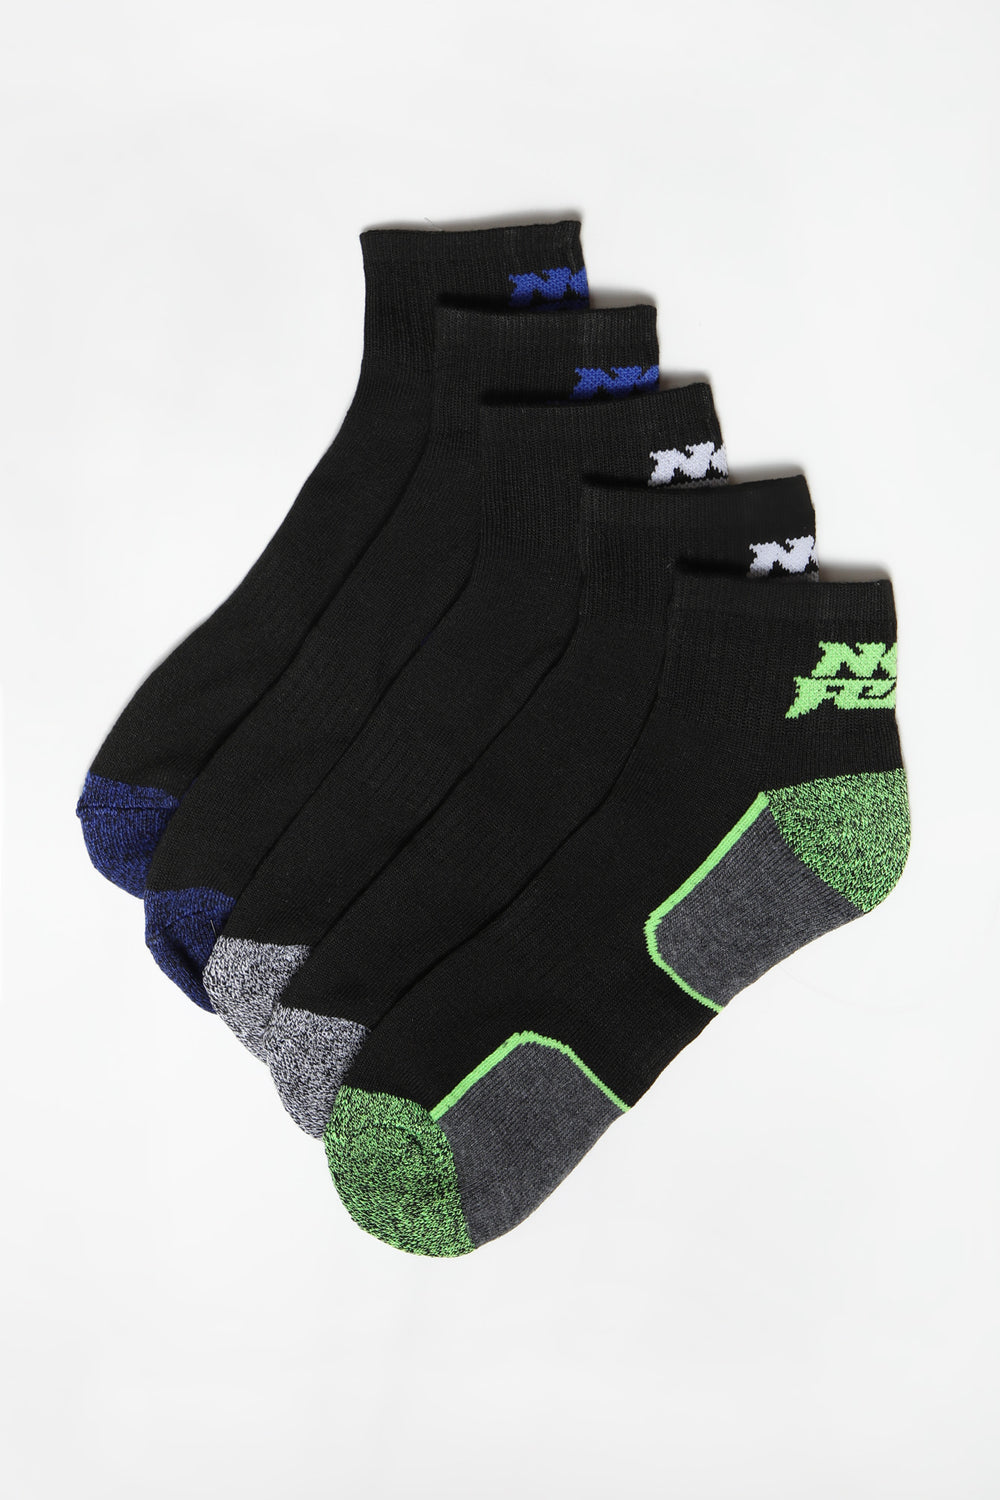 No Fear Mens 5-Pack Athletic Ankle Socks No Fear Mens 5-Pack Athletic Ankle Socks